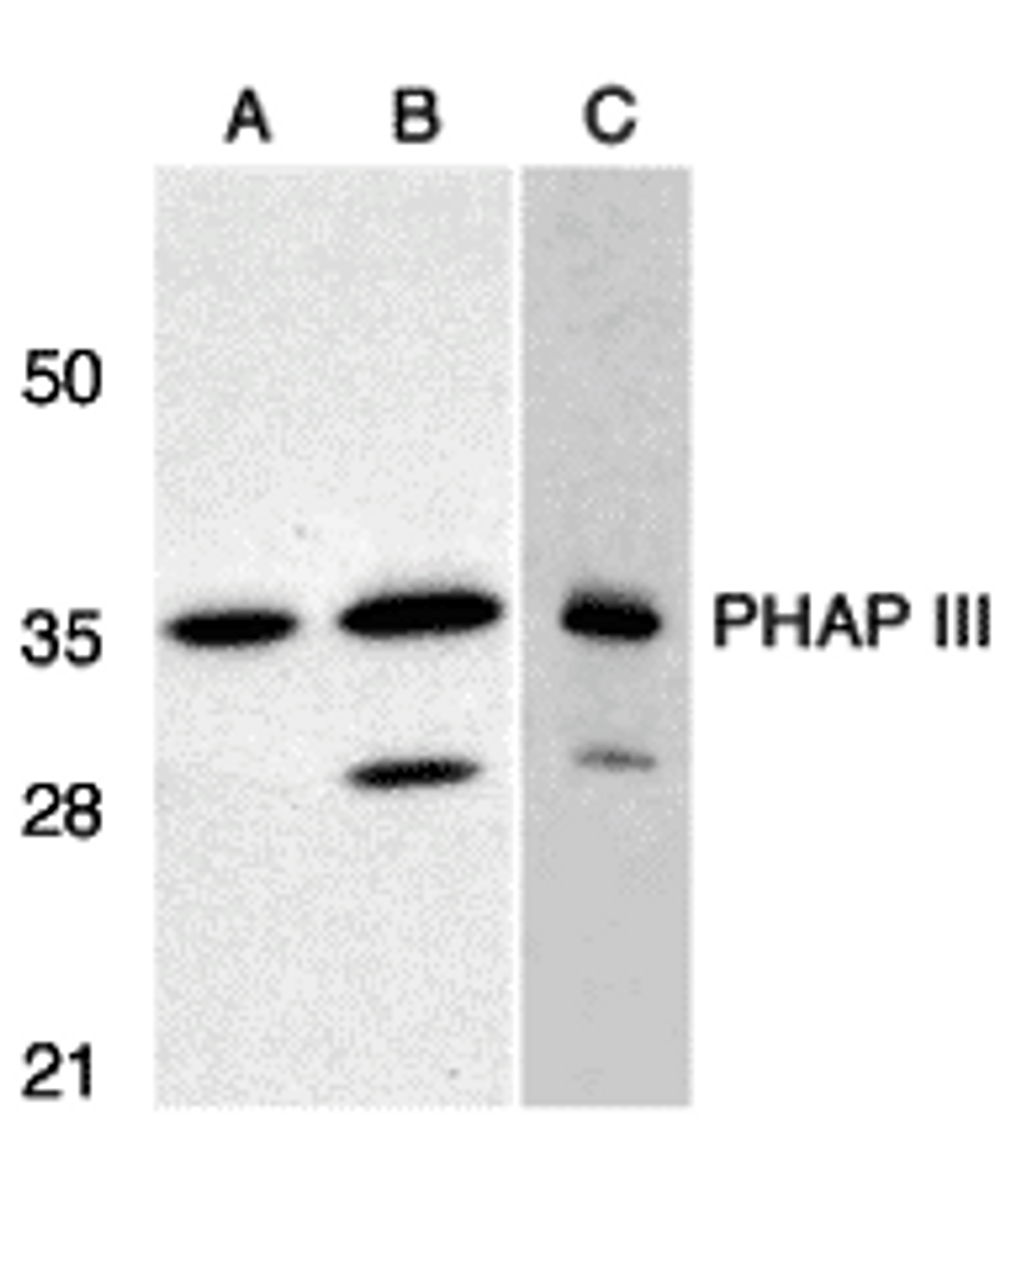 Western blot analysis of PHAP III expression in human A549 (A) and HepG2 (B) cells, and rat testis (C) with PHAP antibody III at 1 &#956;g/mL.